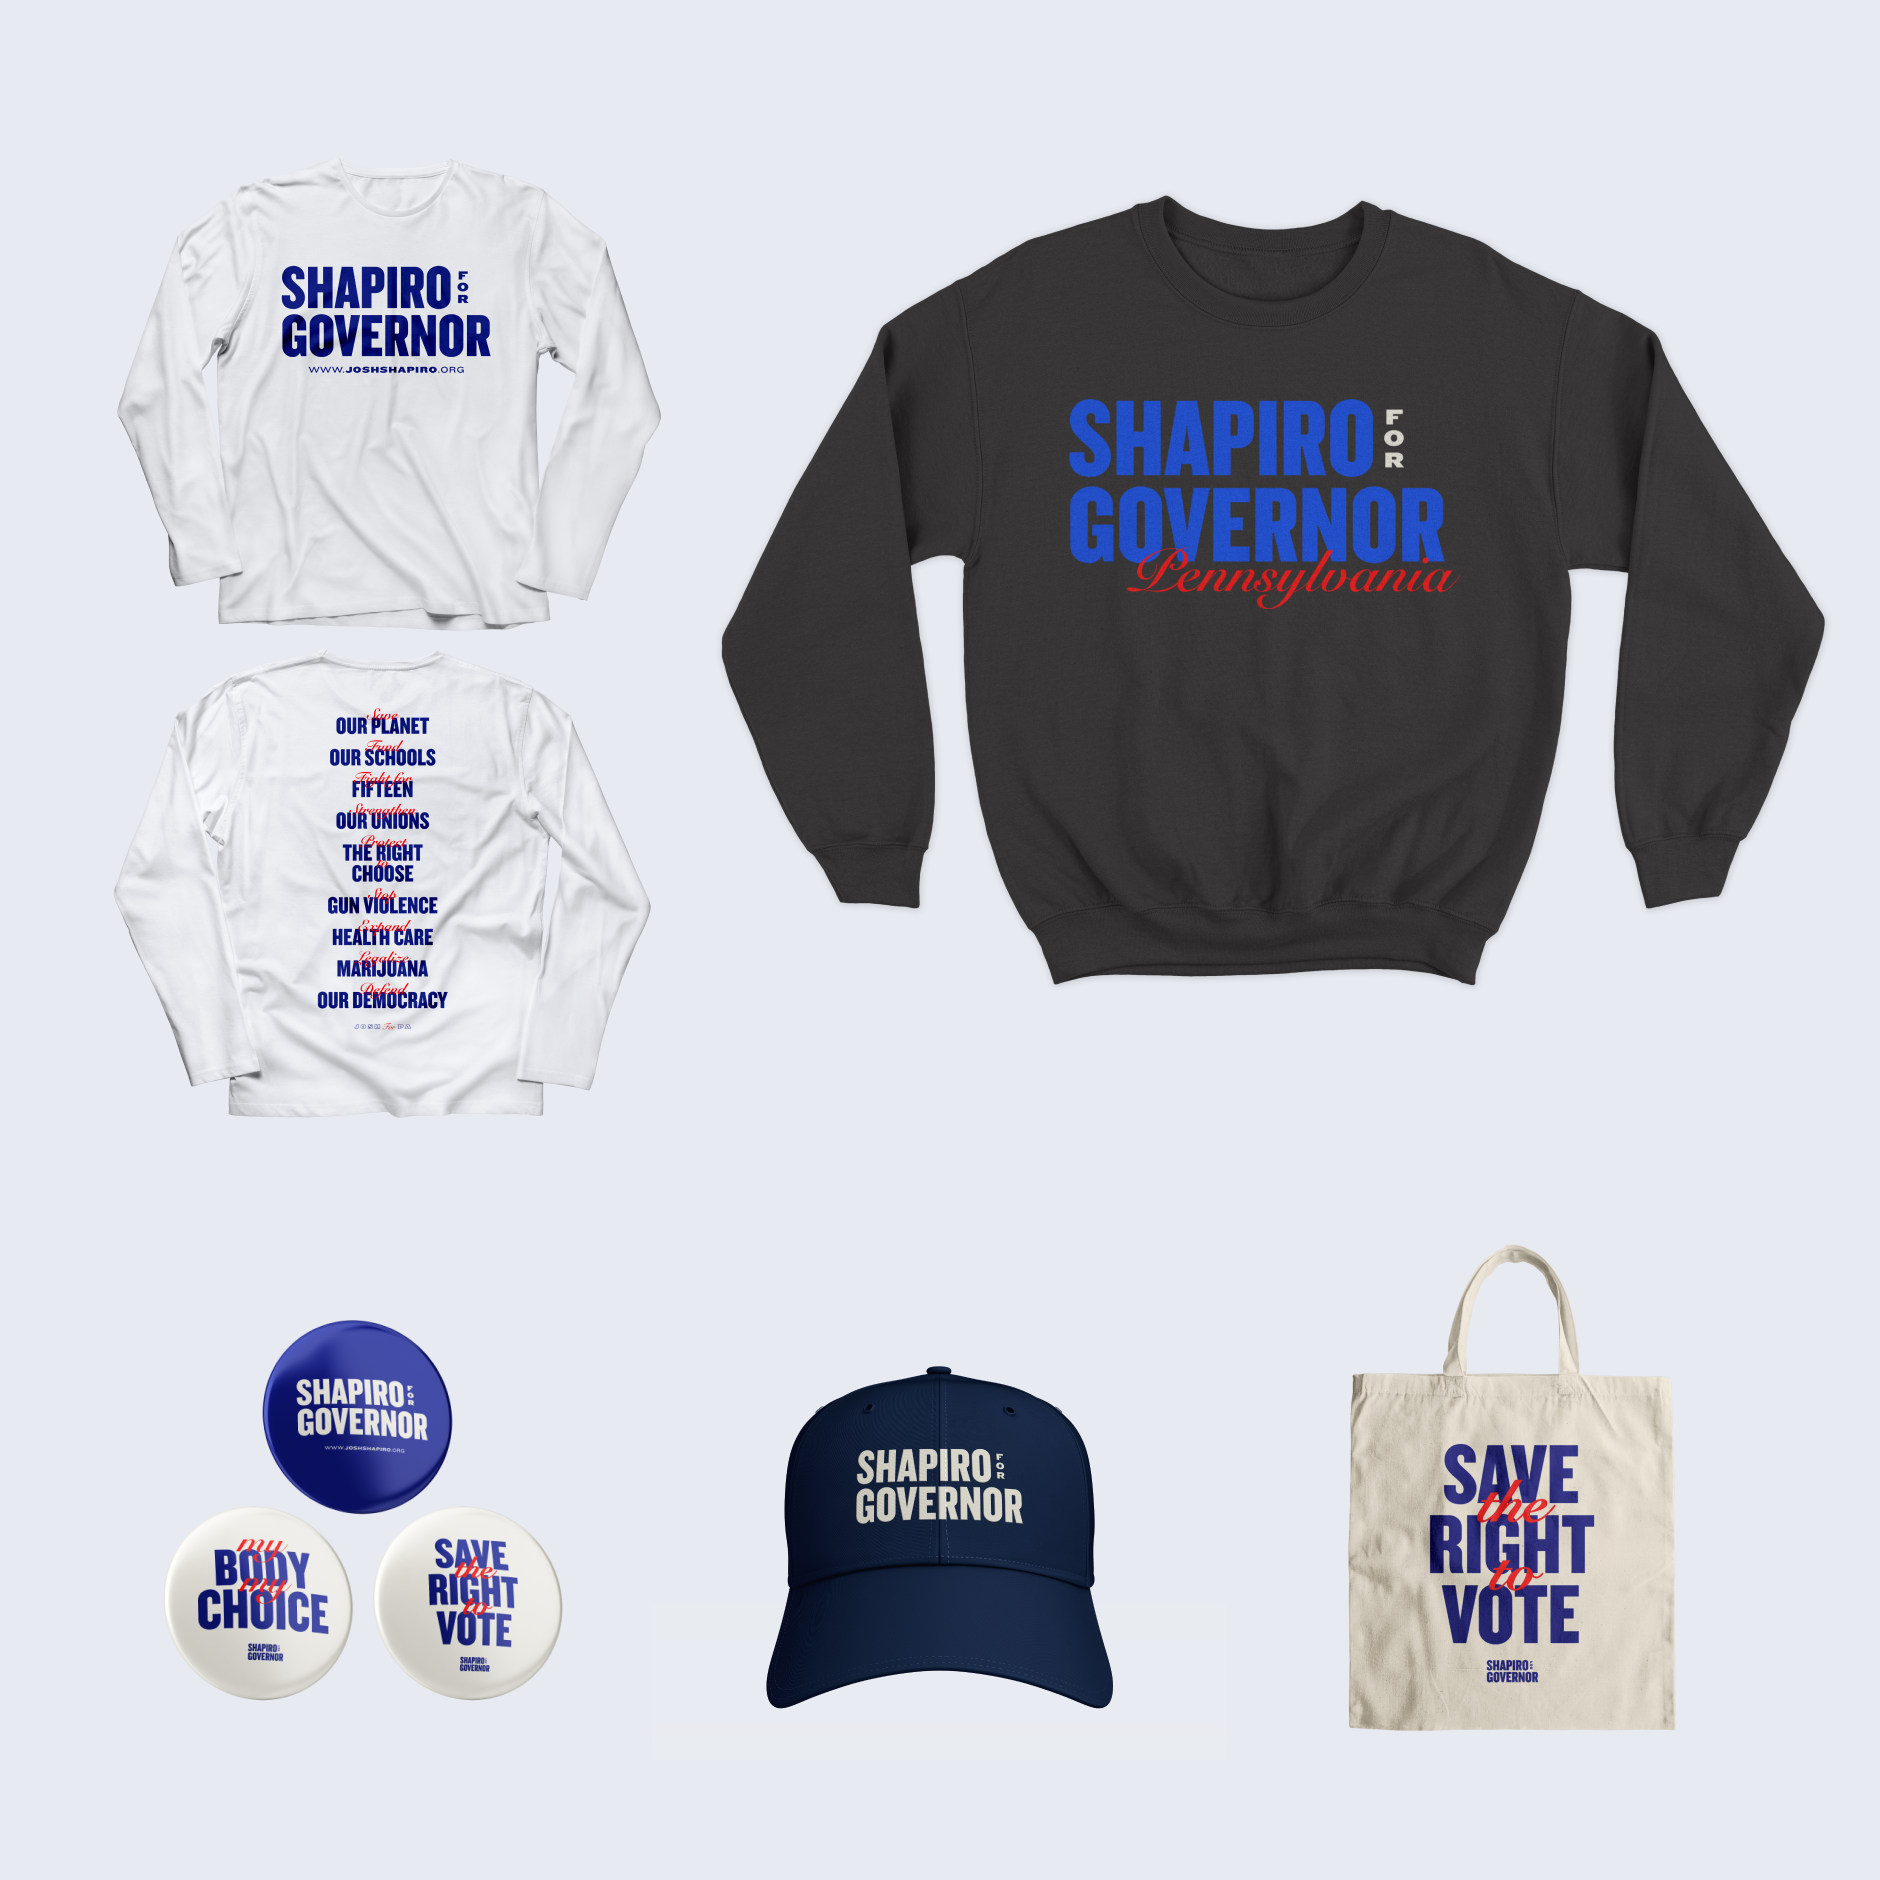 Shapiro for Governor branding on sweatshirts, pins, a hat, and a tote